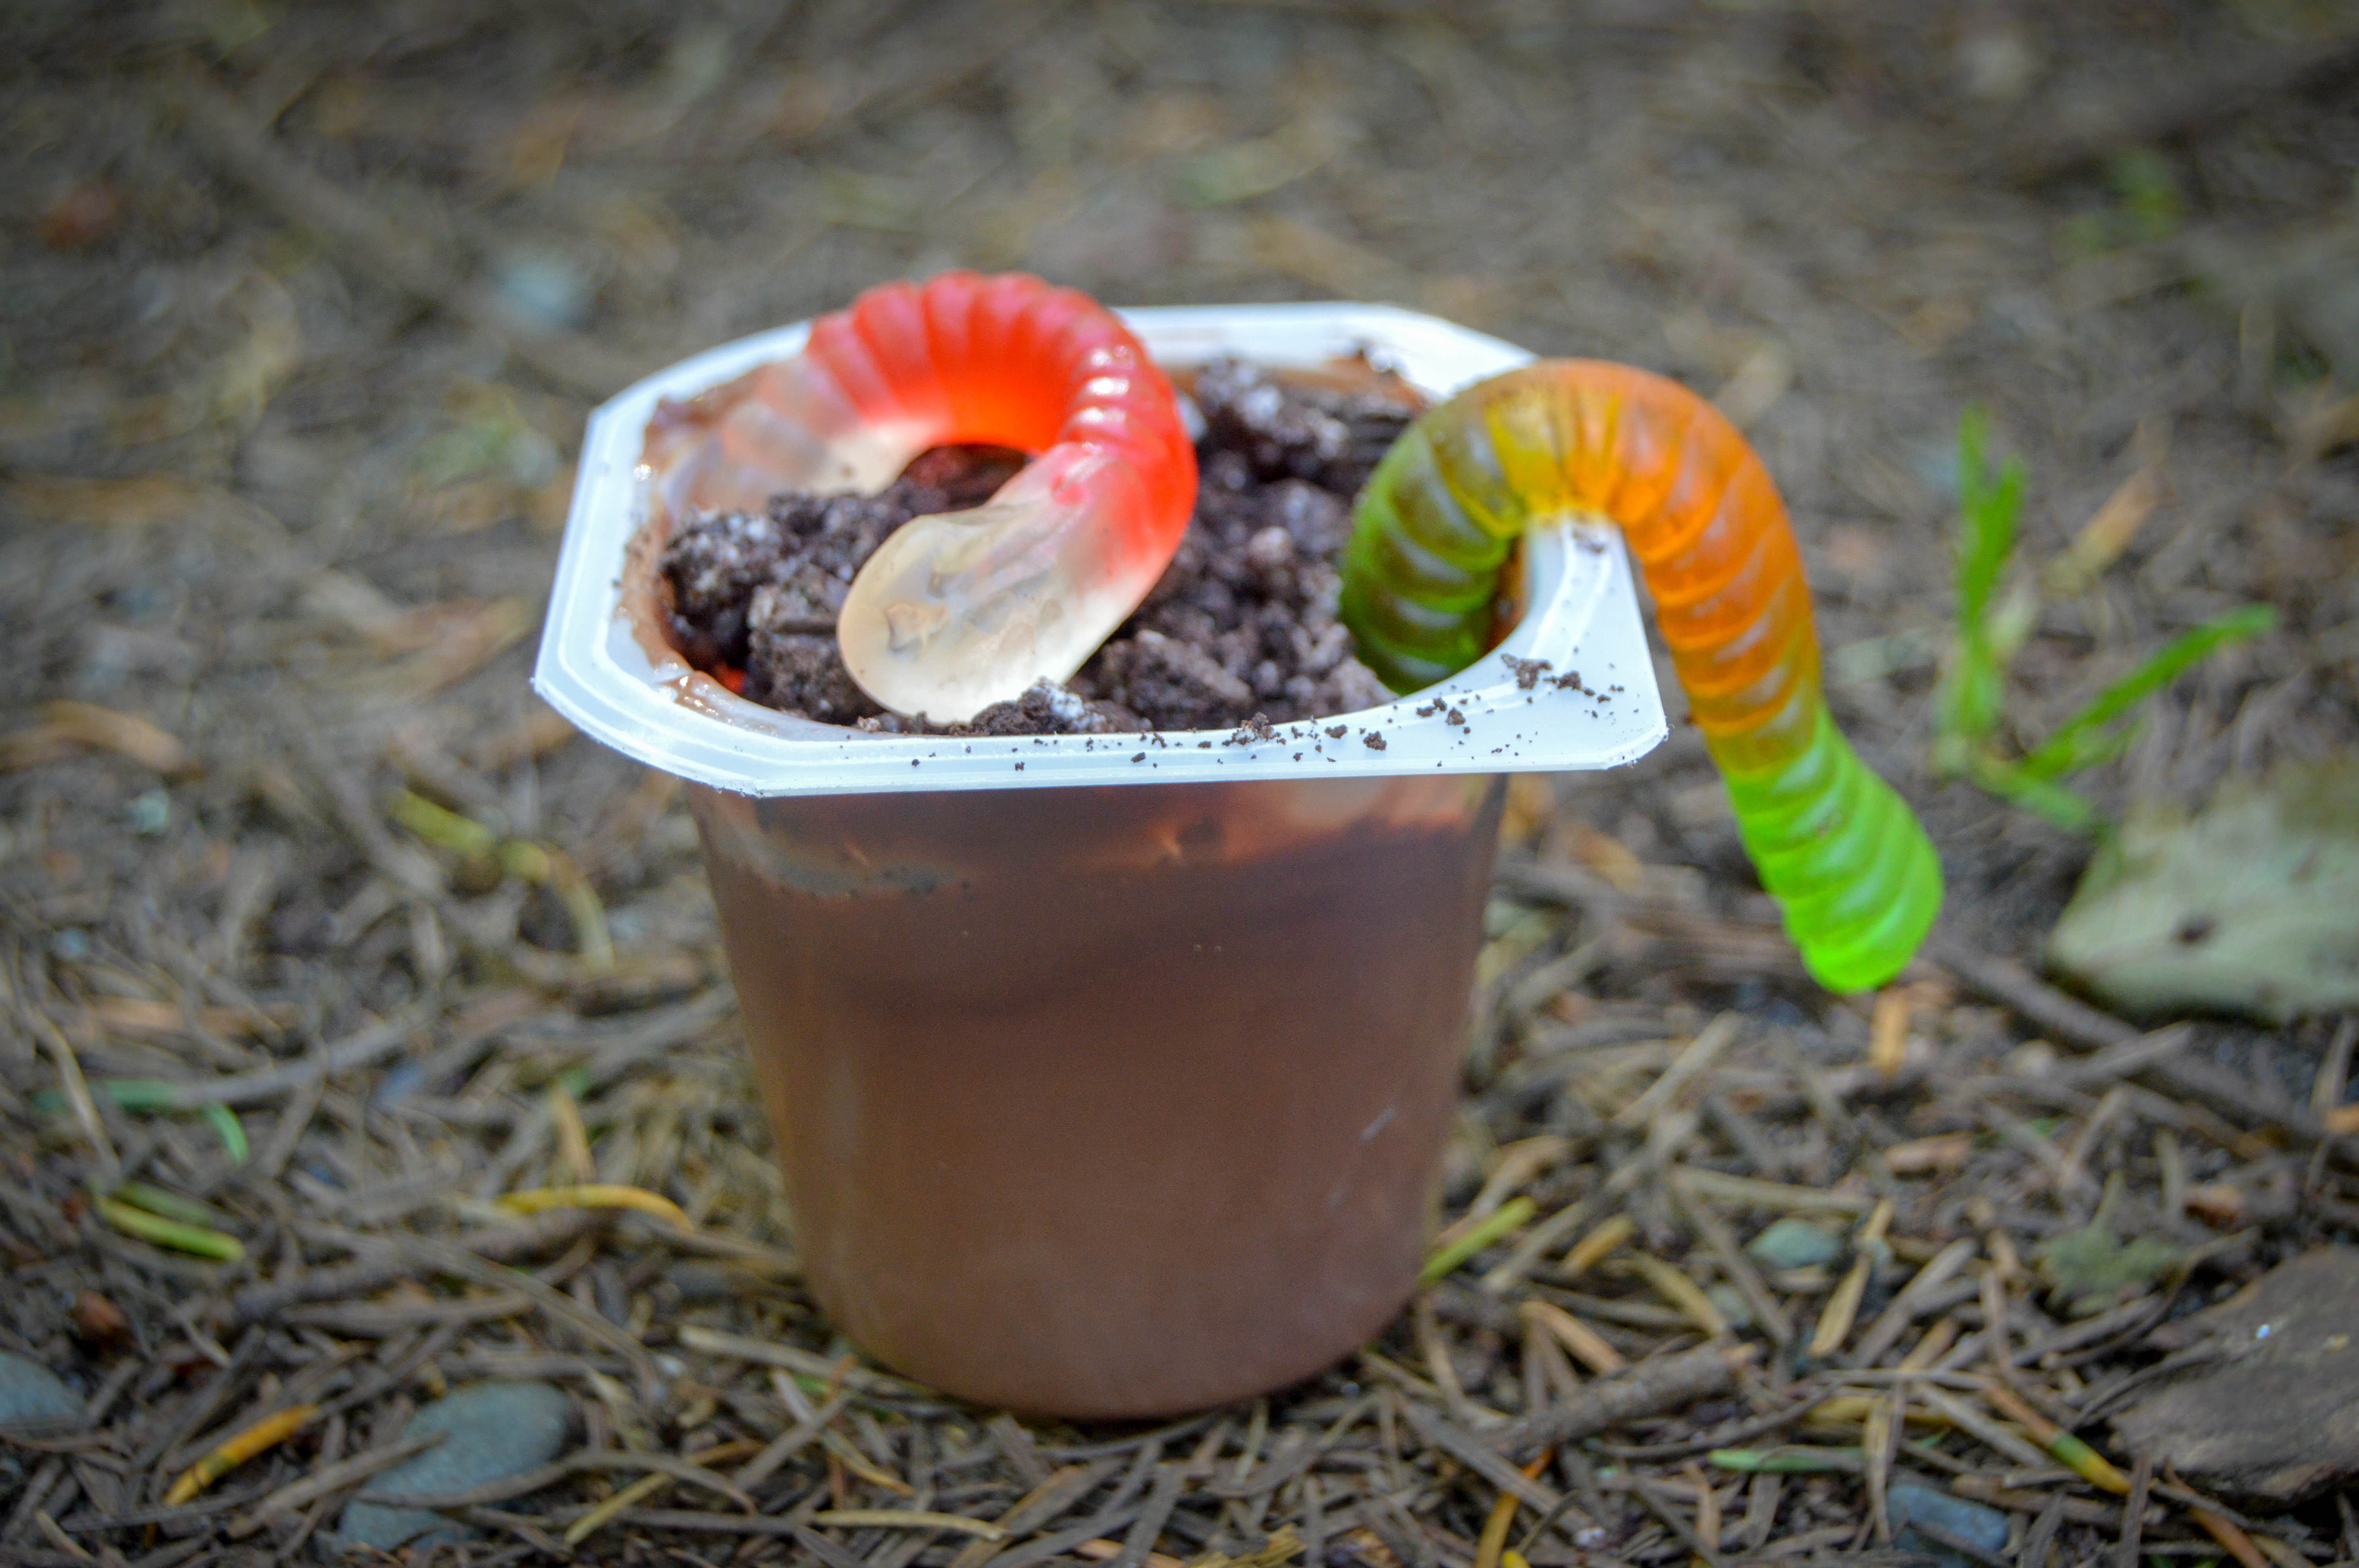 Fun Camping Activities for Toddlers #8 - Make dessert dirt cups